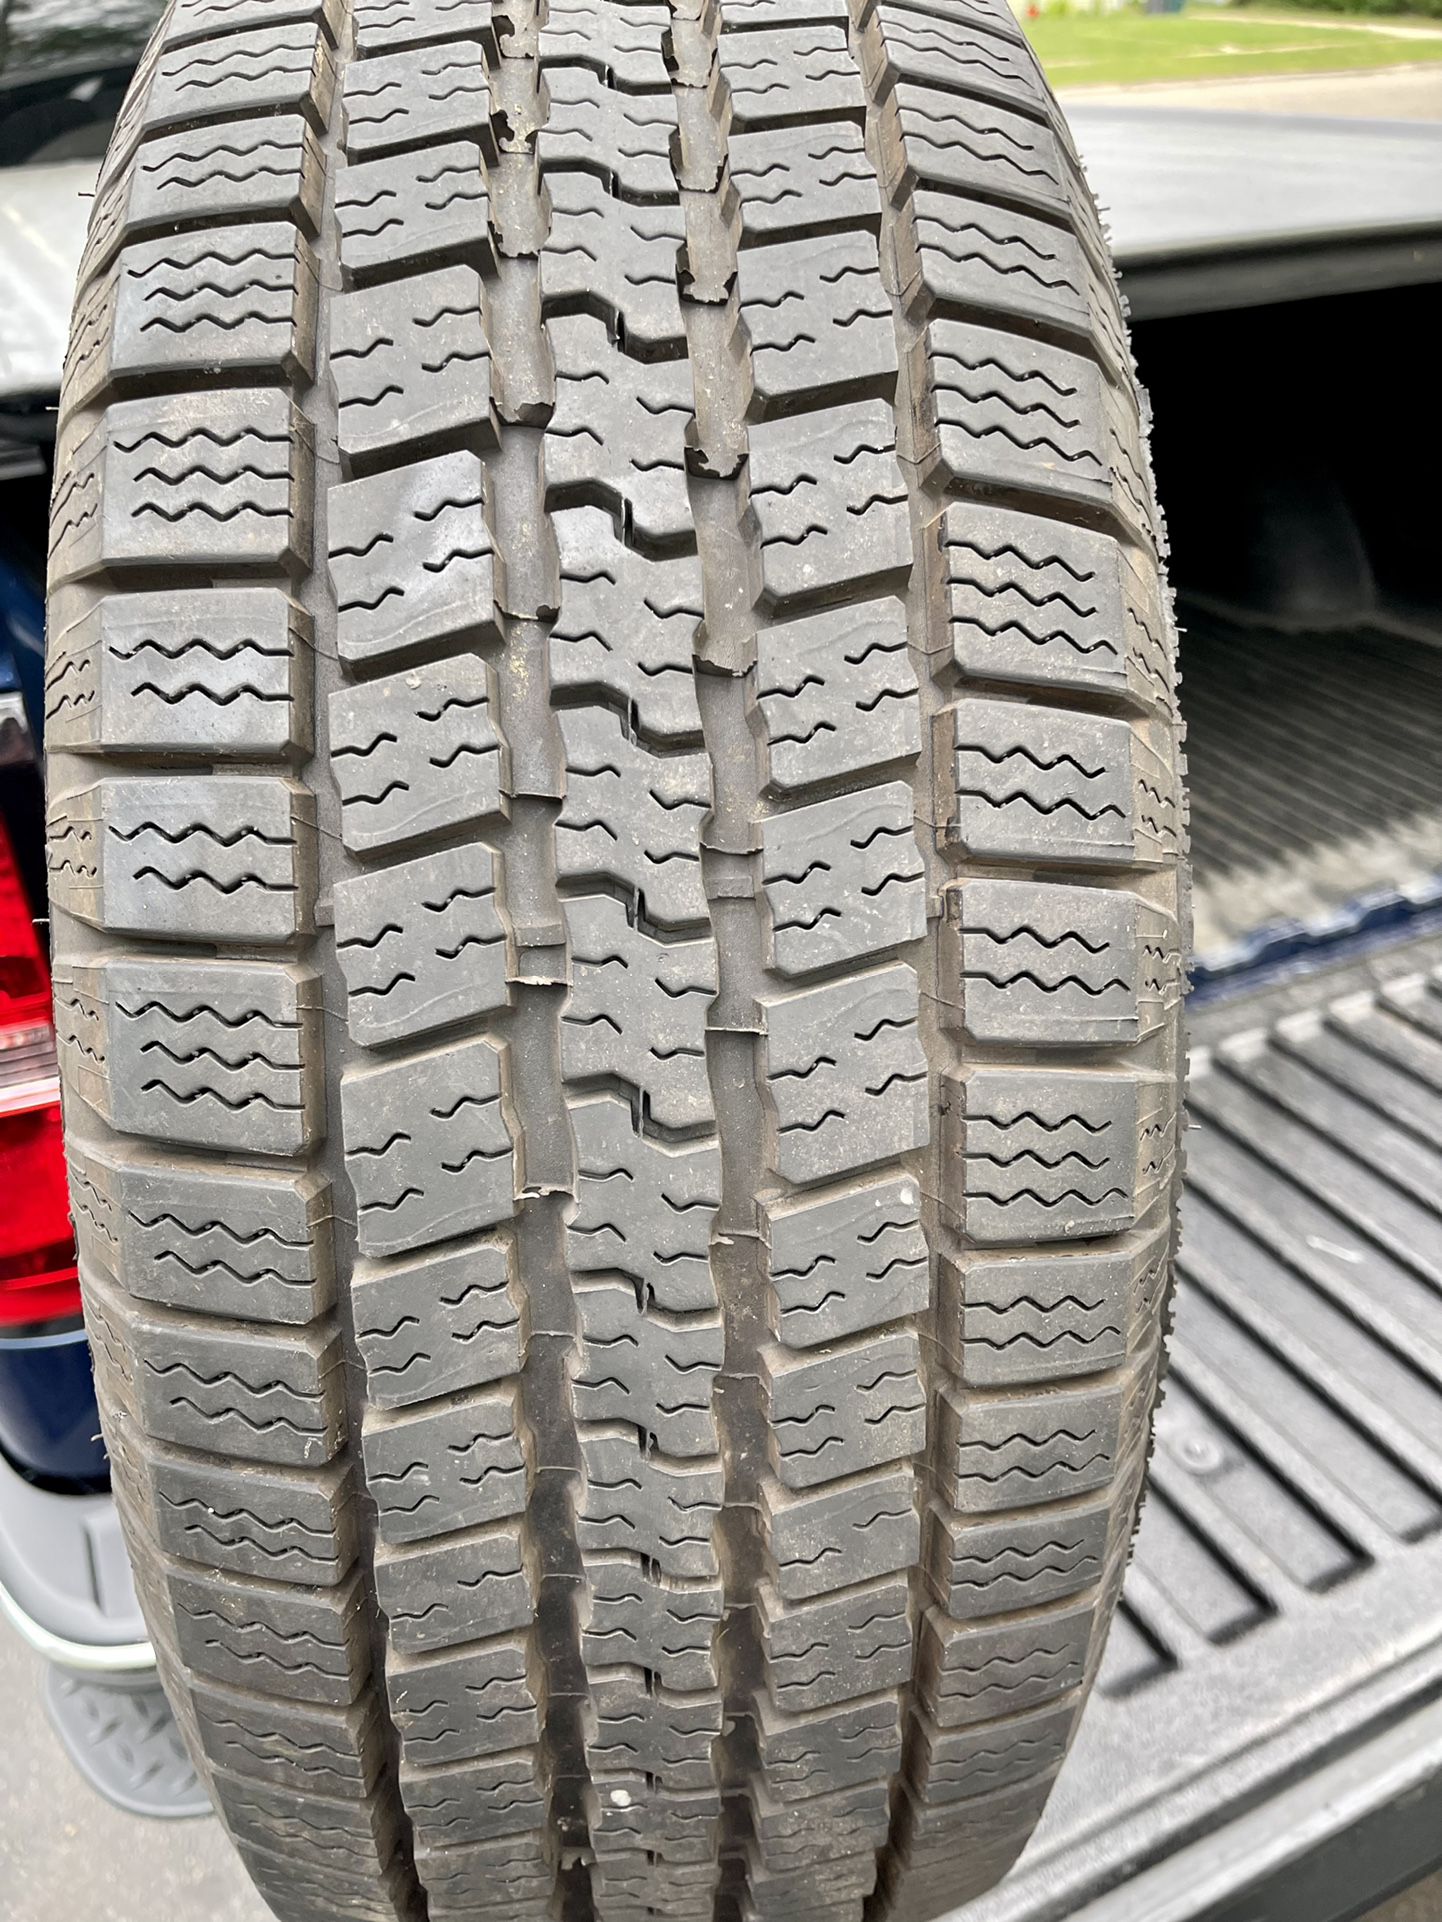 225/70/15 Goodyear Wrangler Tires for Sale in Waukegan, IL - OfferUp